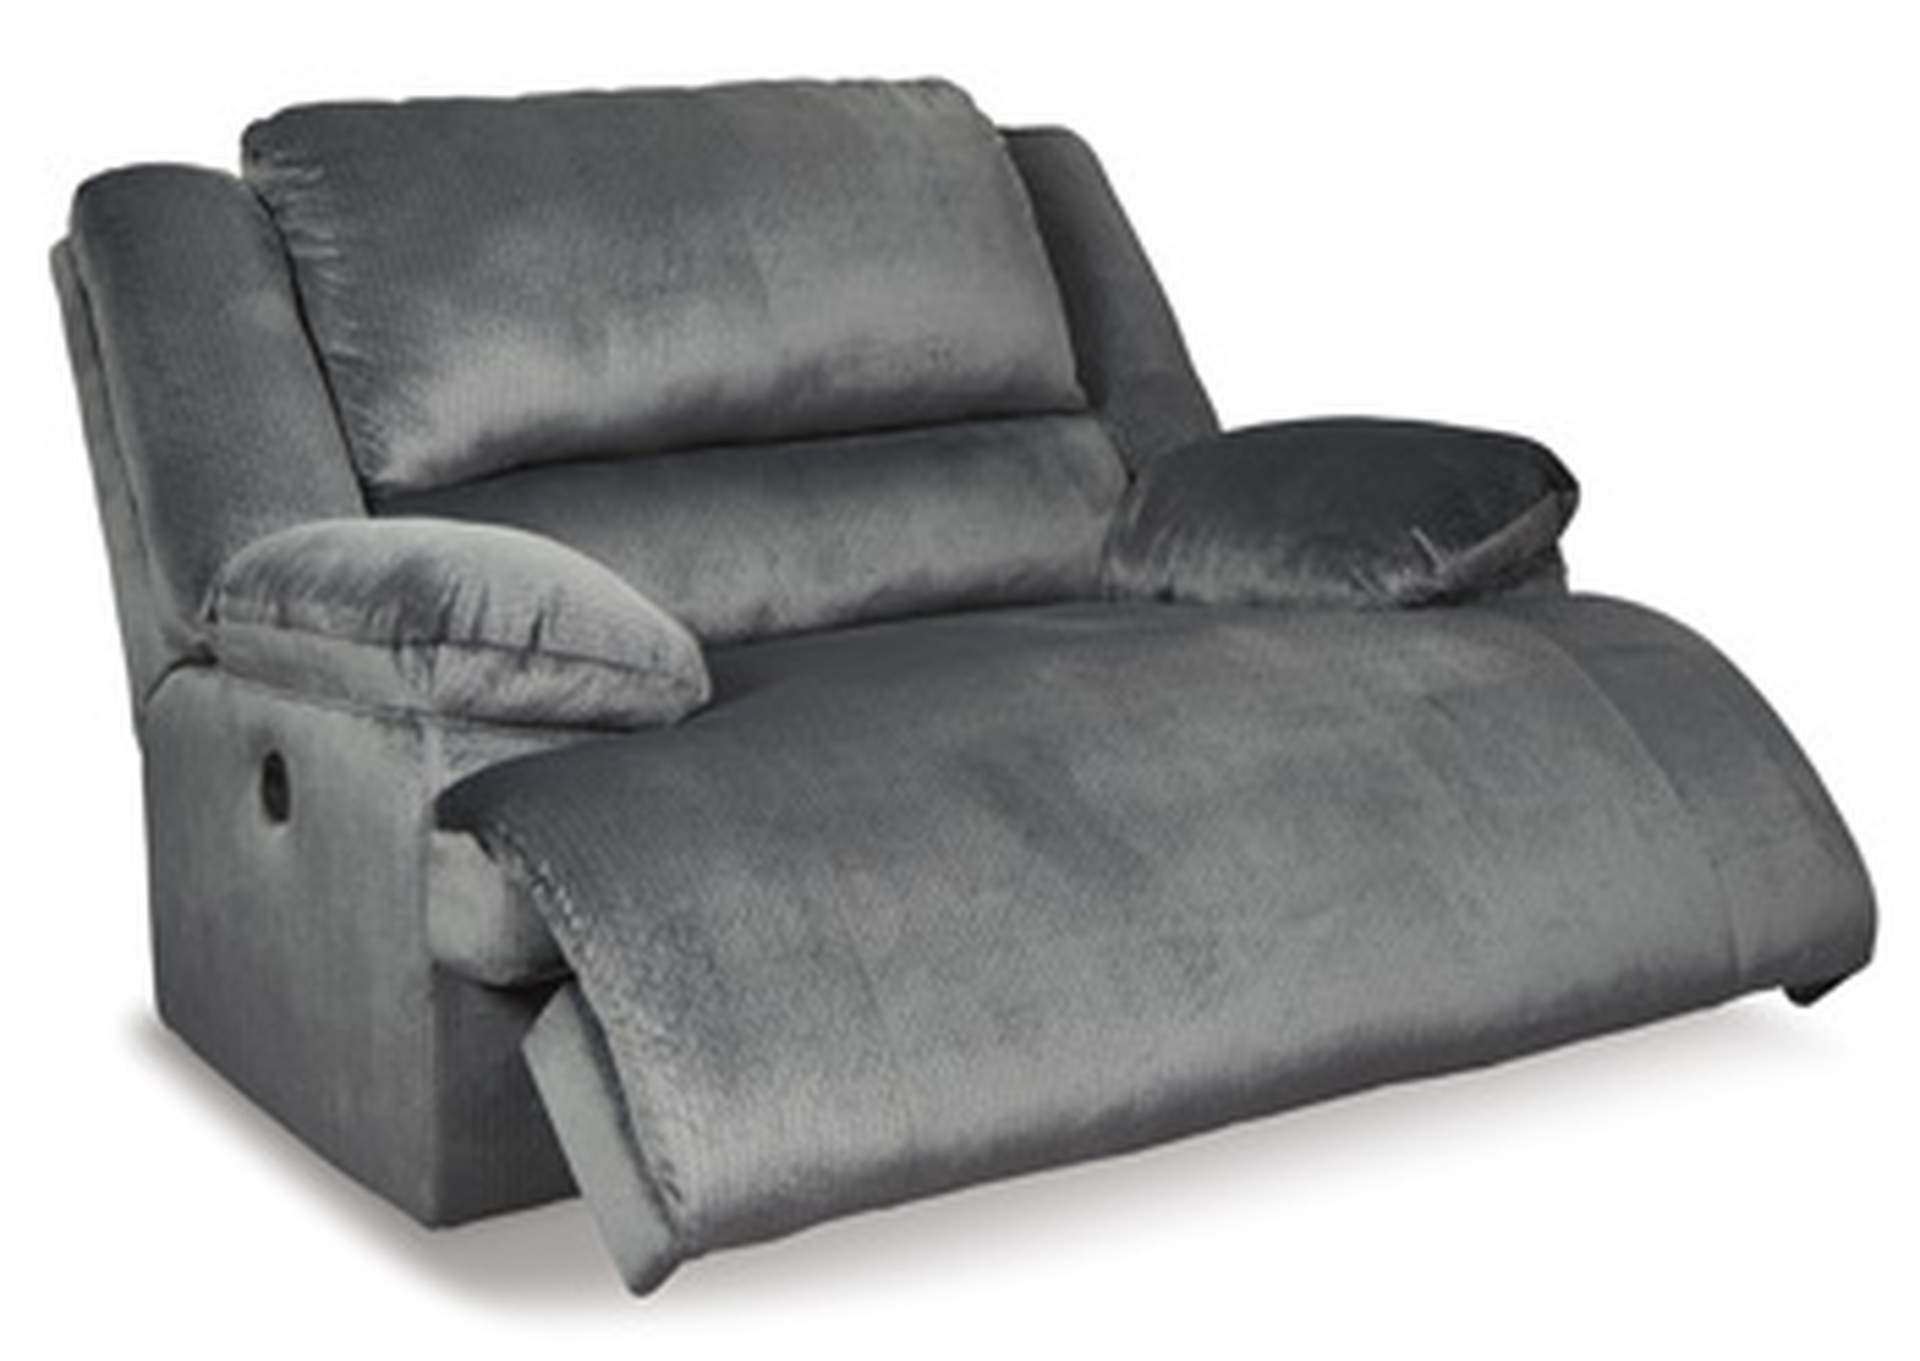 Clonmel Oversized Power Recliner,Signature Design By Ashley